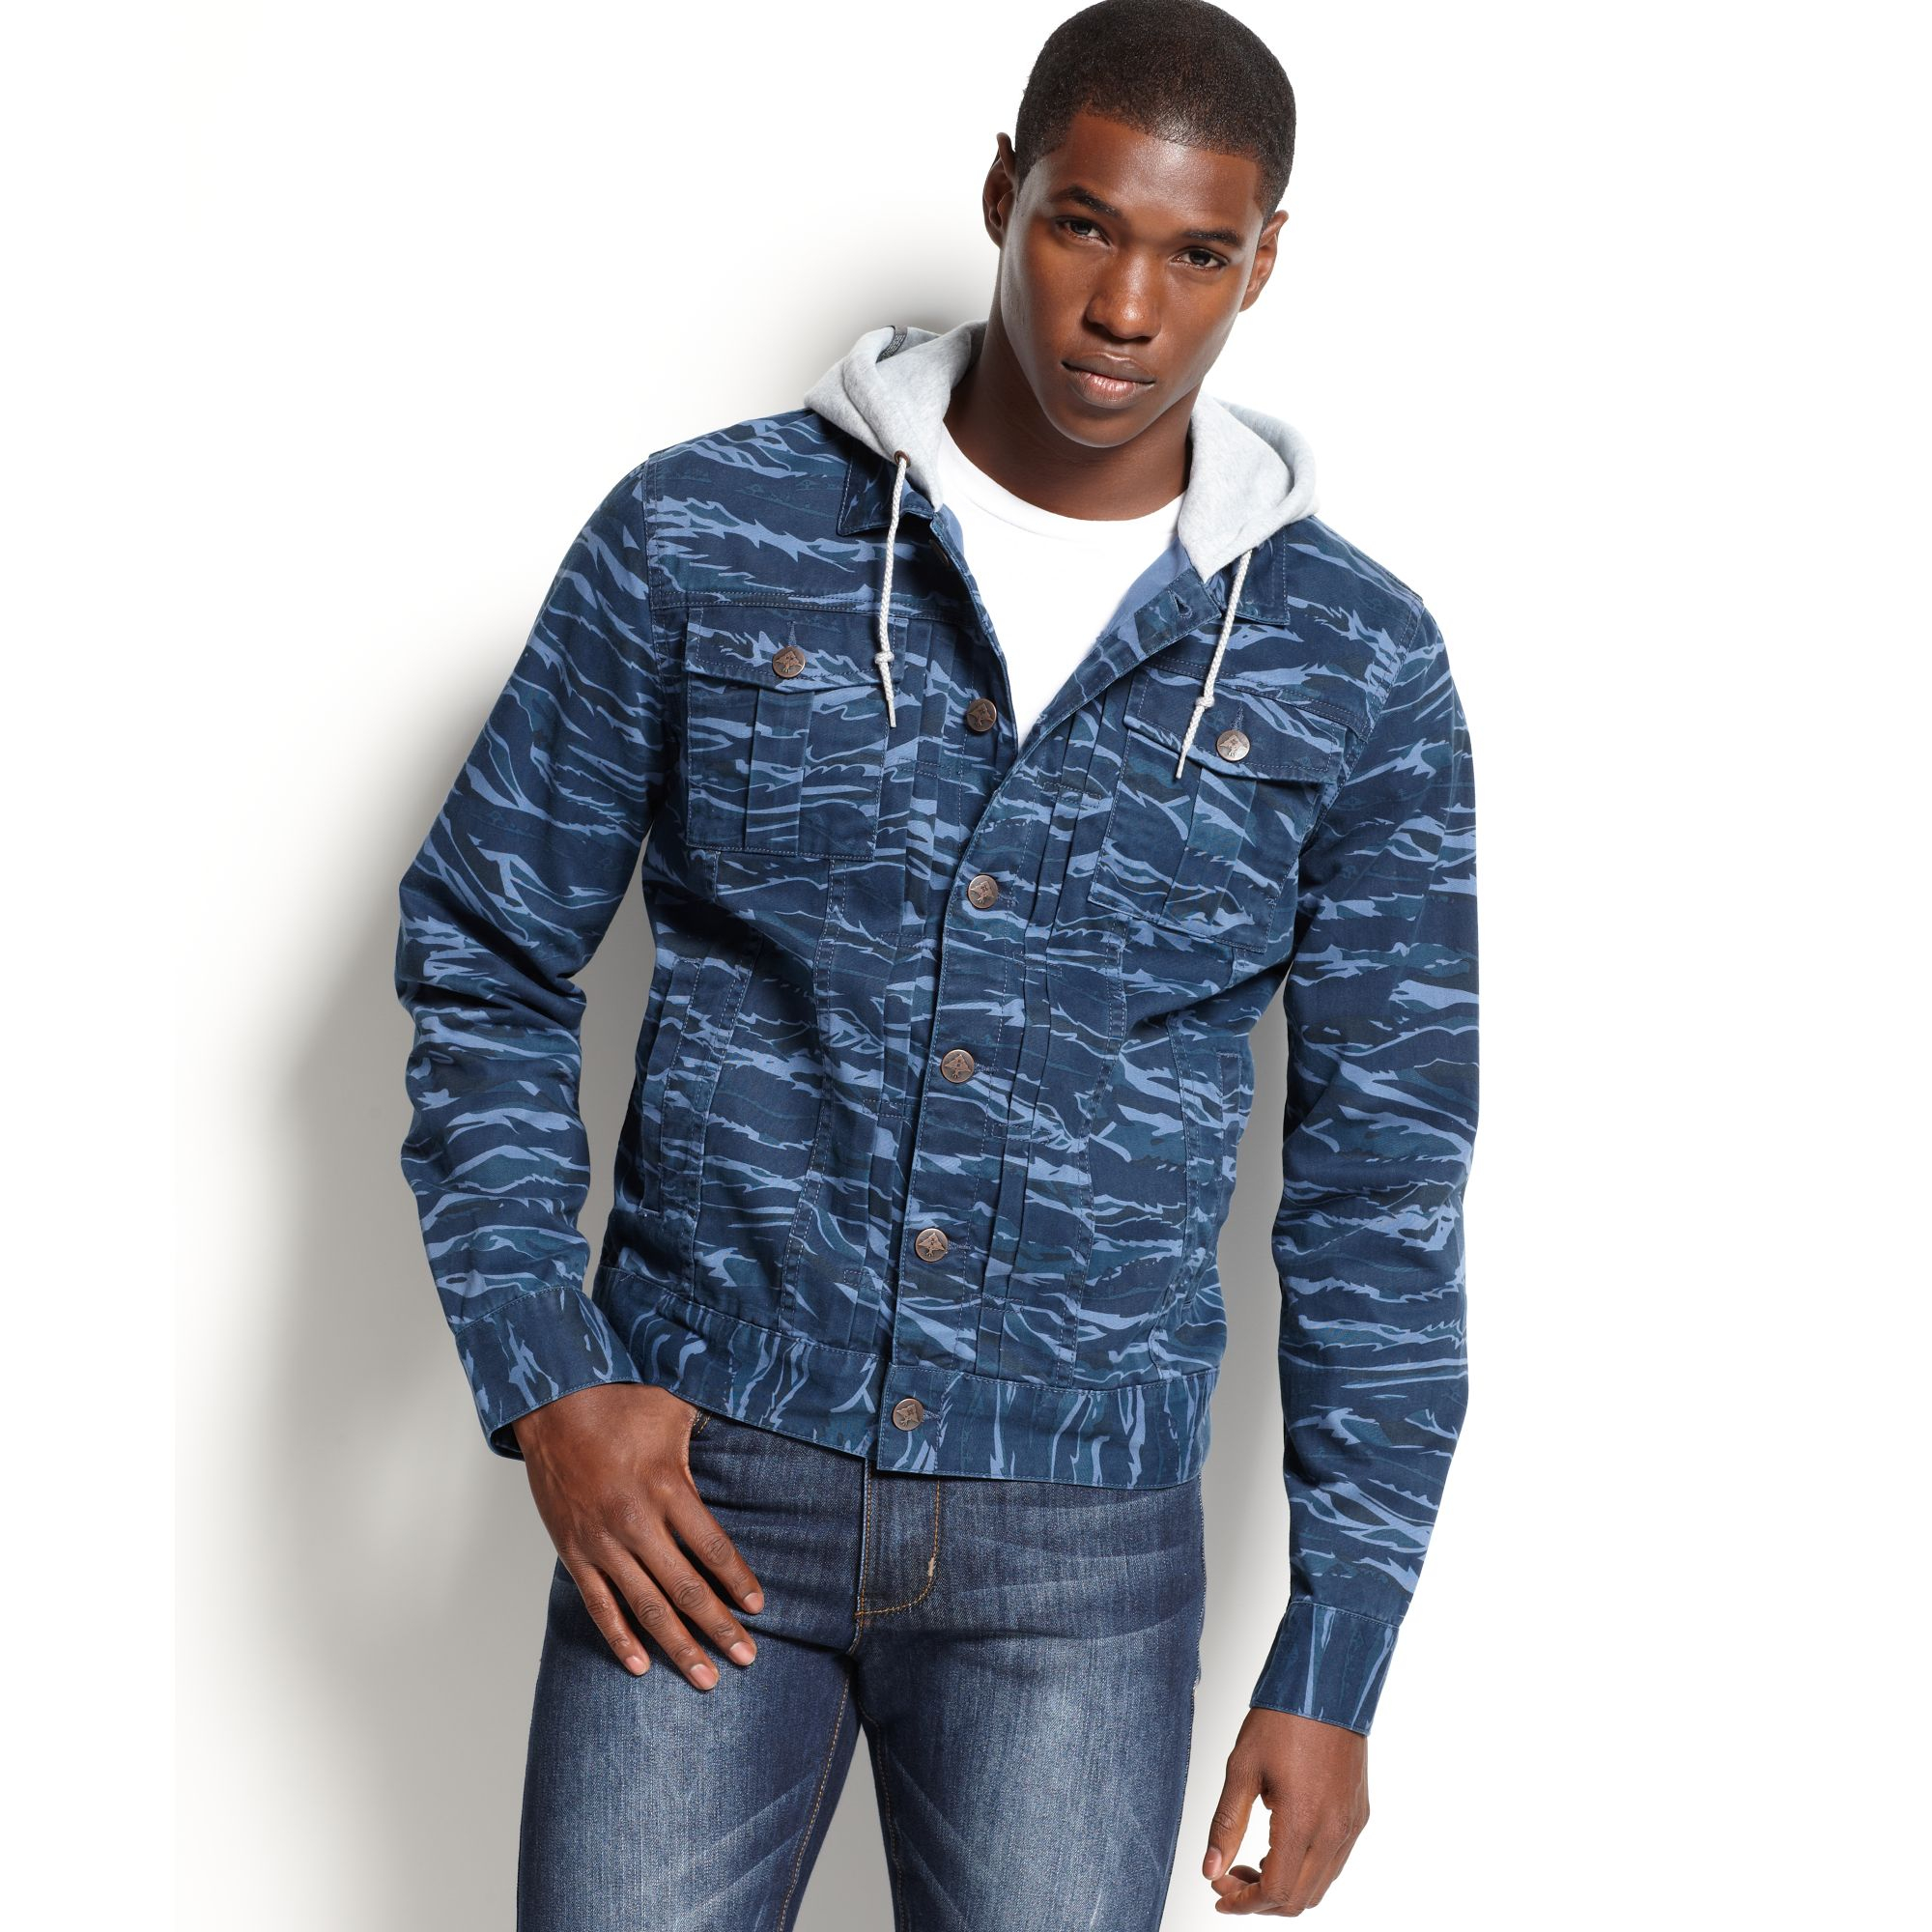 Lyst - Lrg Core Collection Hooded Camo Jacket in Blue for Men